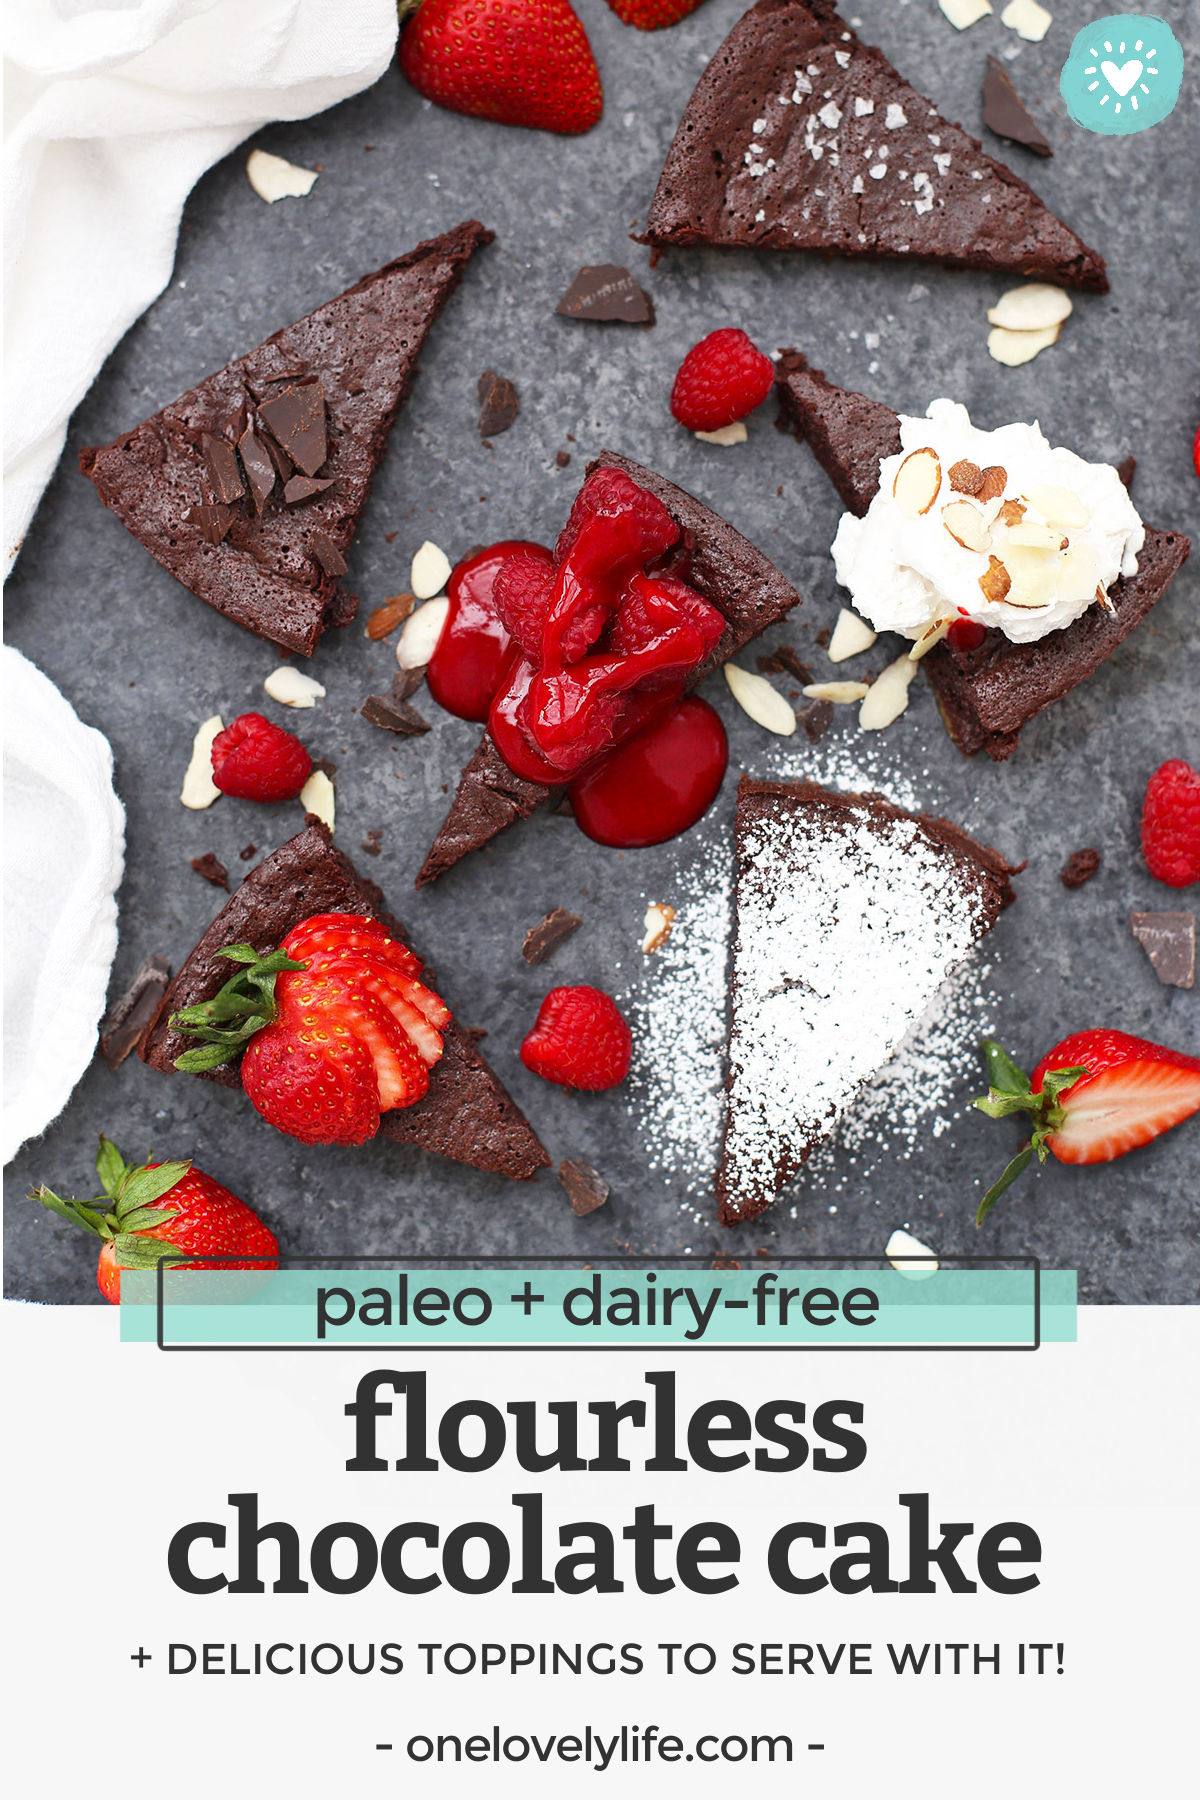 Flourless Chocolate Cake - This dense, perfectly rich chocolate cake is gluten free, dairy free, and naturally sweetened, but has all the indulgent decadence you're looking for on a special occasion. Pro tip: don't skip the raspberry sauce! // dairy free flourless chocolate cake recipe // paleo flourless chocolate cake // gluten free flourless chocolate cake // paleo chocolate cake // gluten free chocolate cake #flourlesschocolate cake #chocolatecake #valentinesday